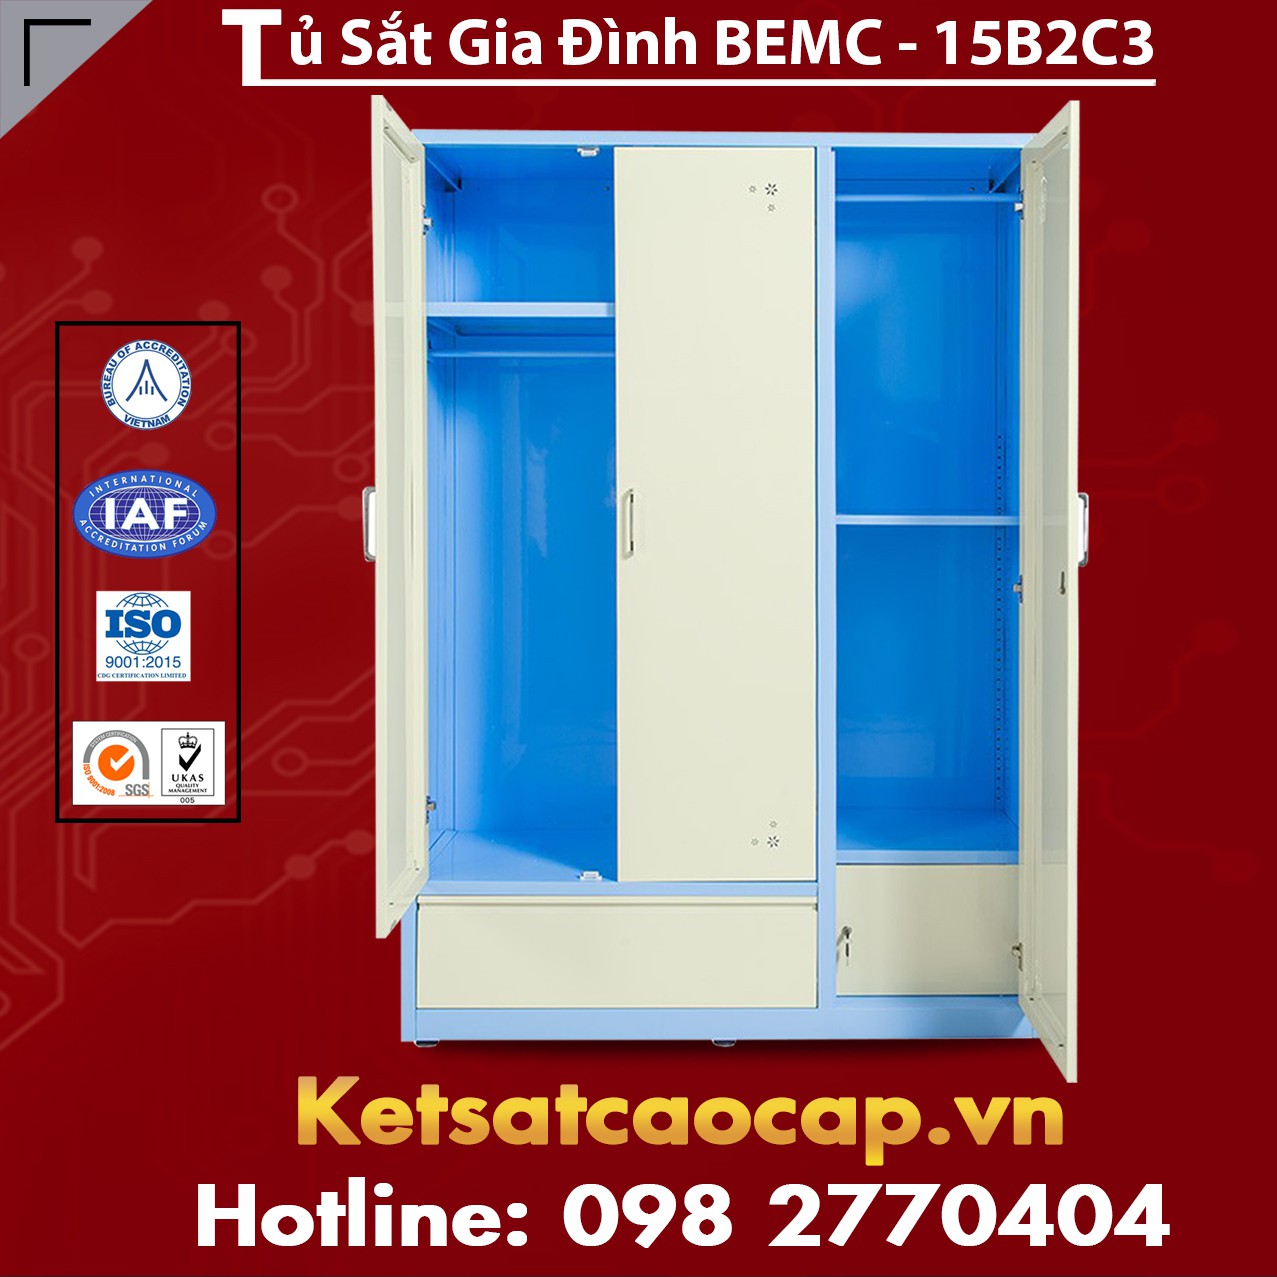 Tu Sat Gia Dinh Chat Luong Quoc Te